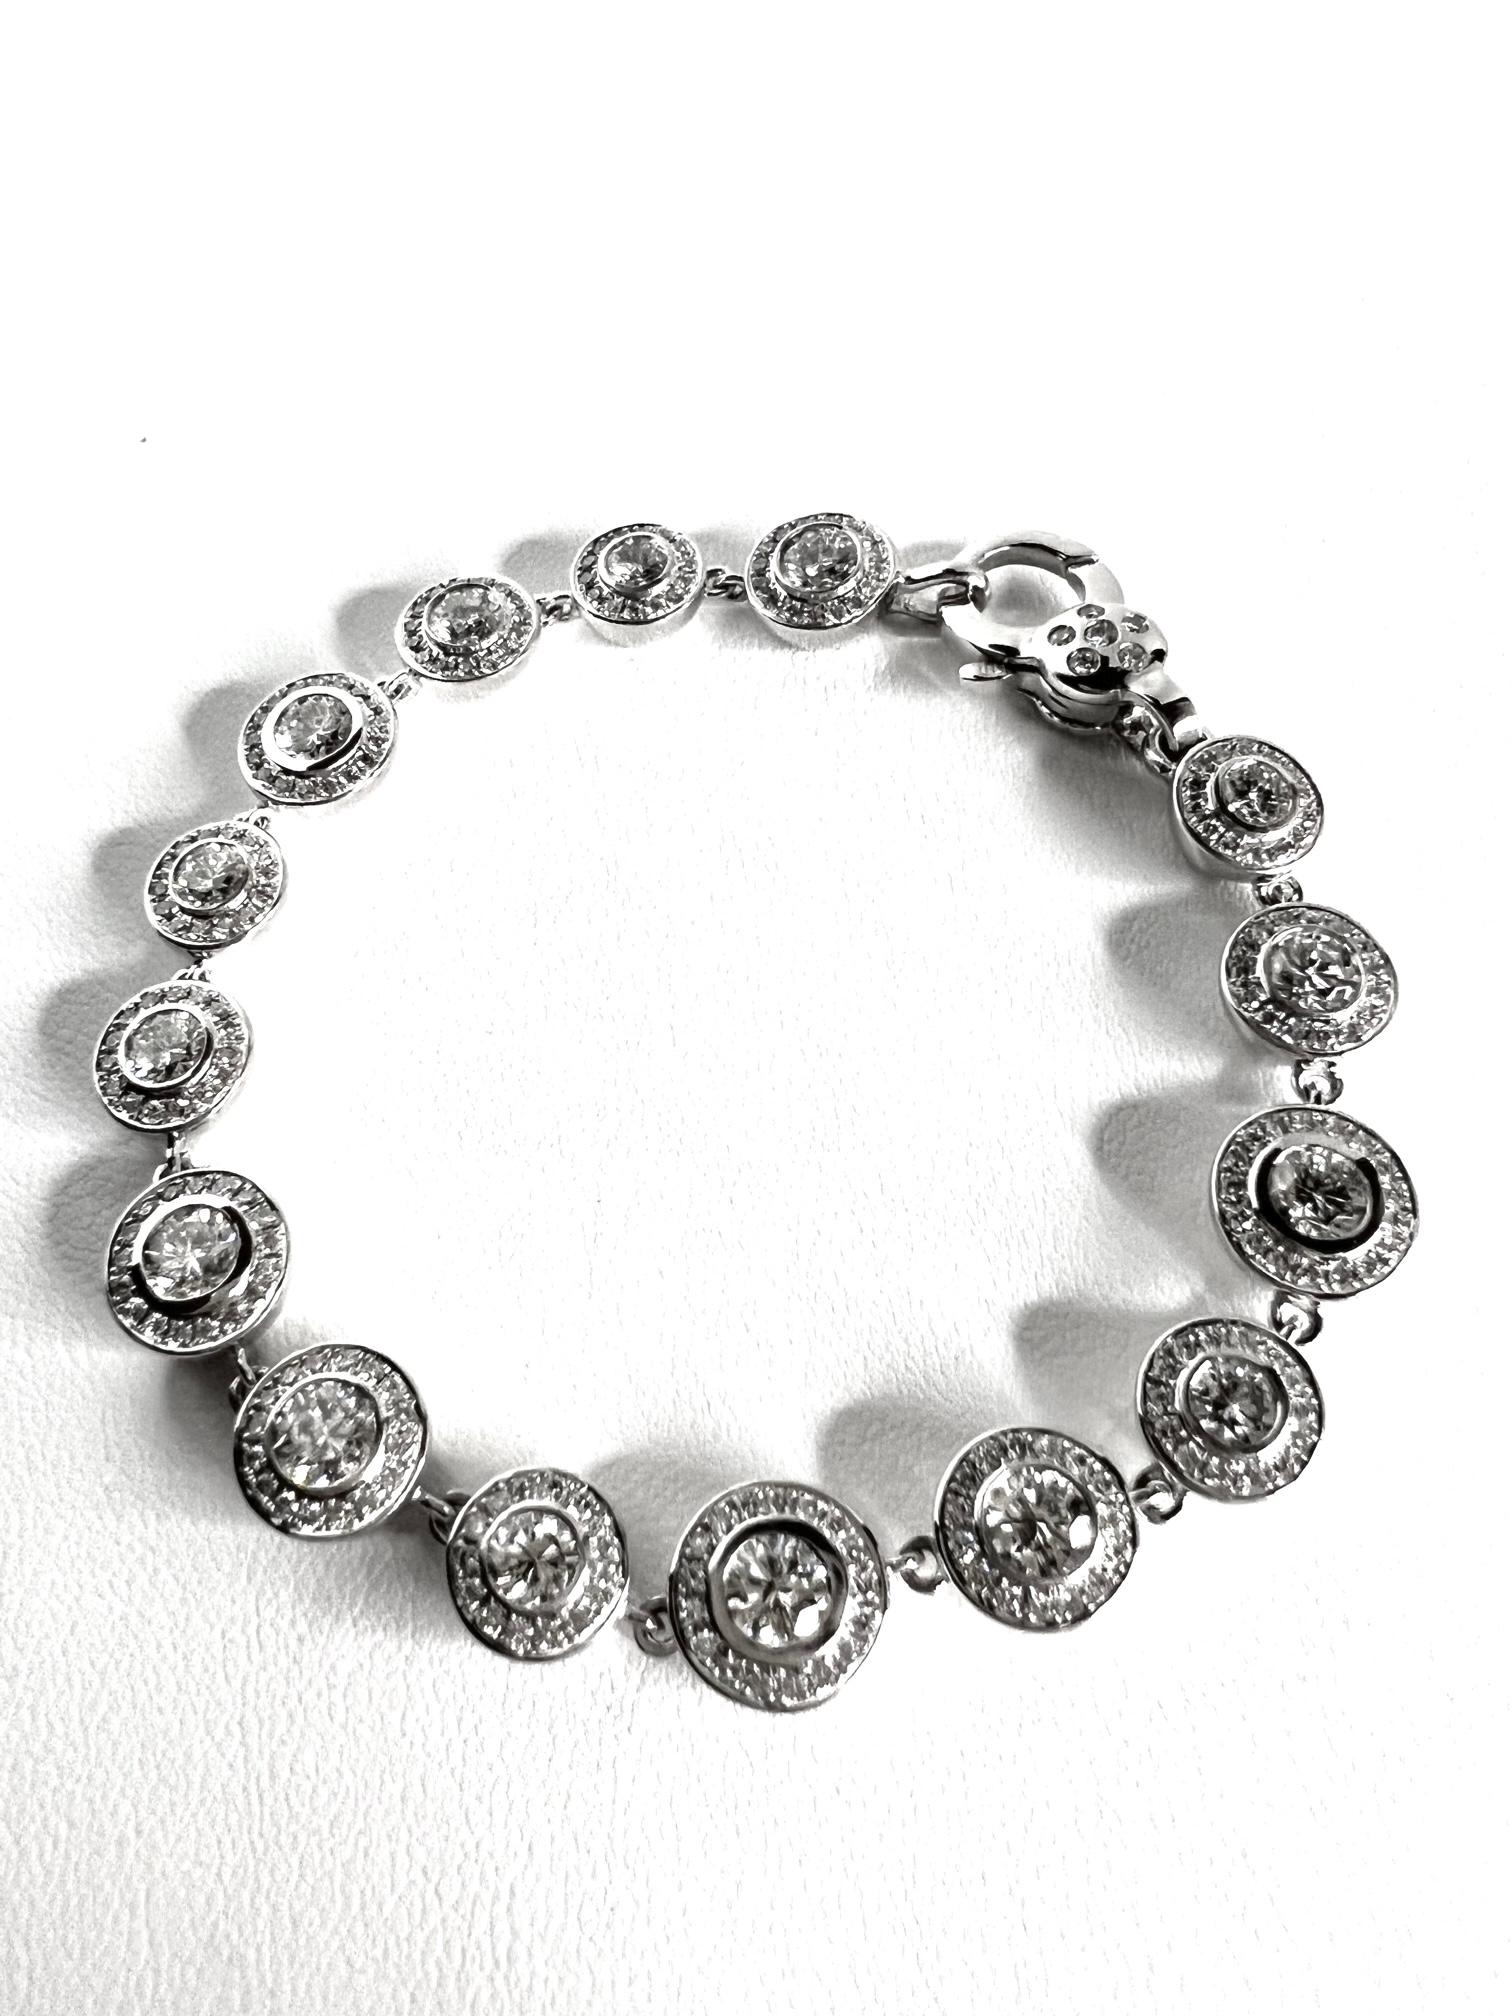 Women's Bracelet in White Gold with Diamonds For Sale